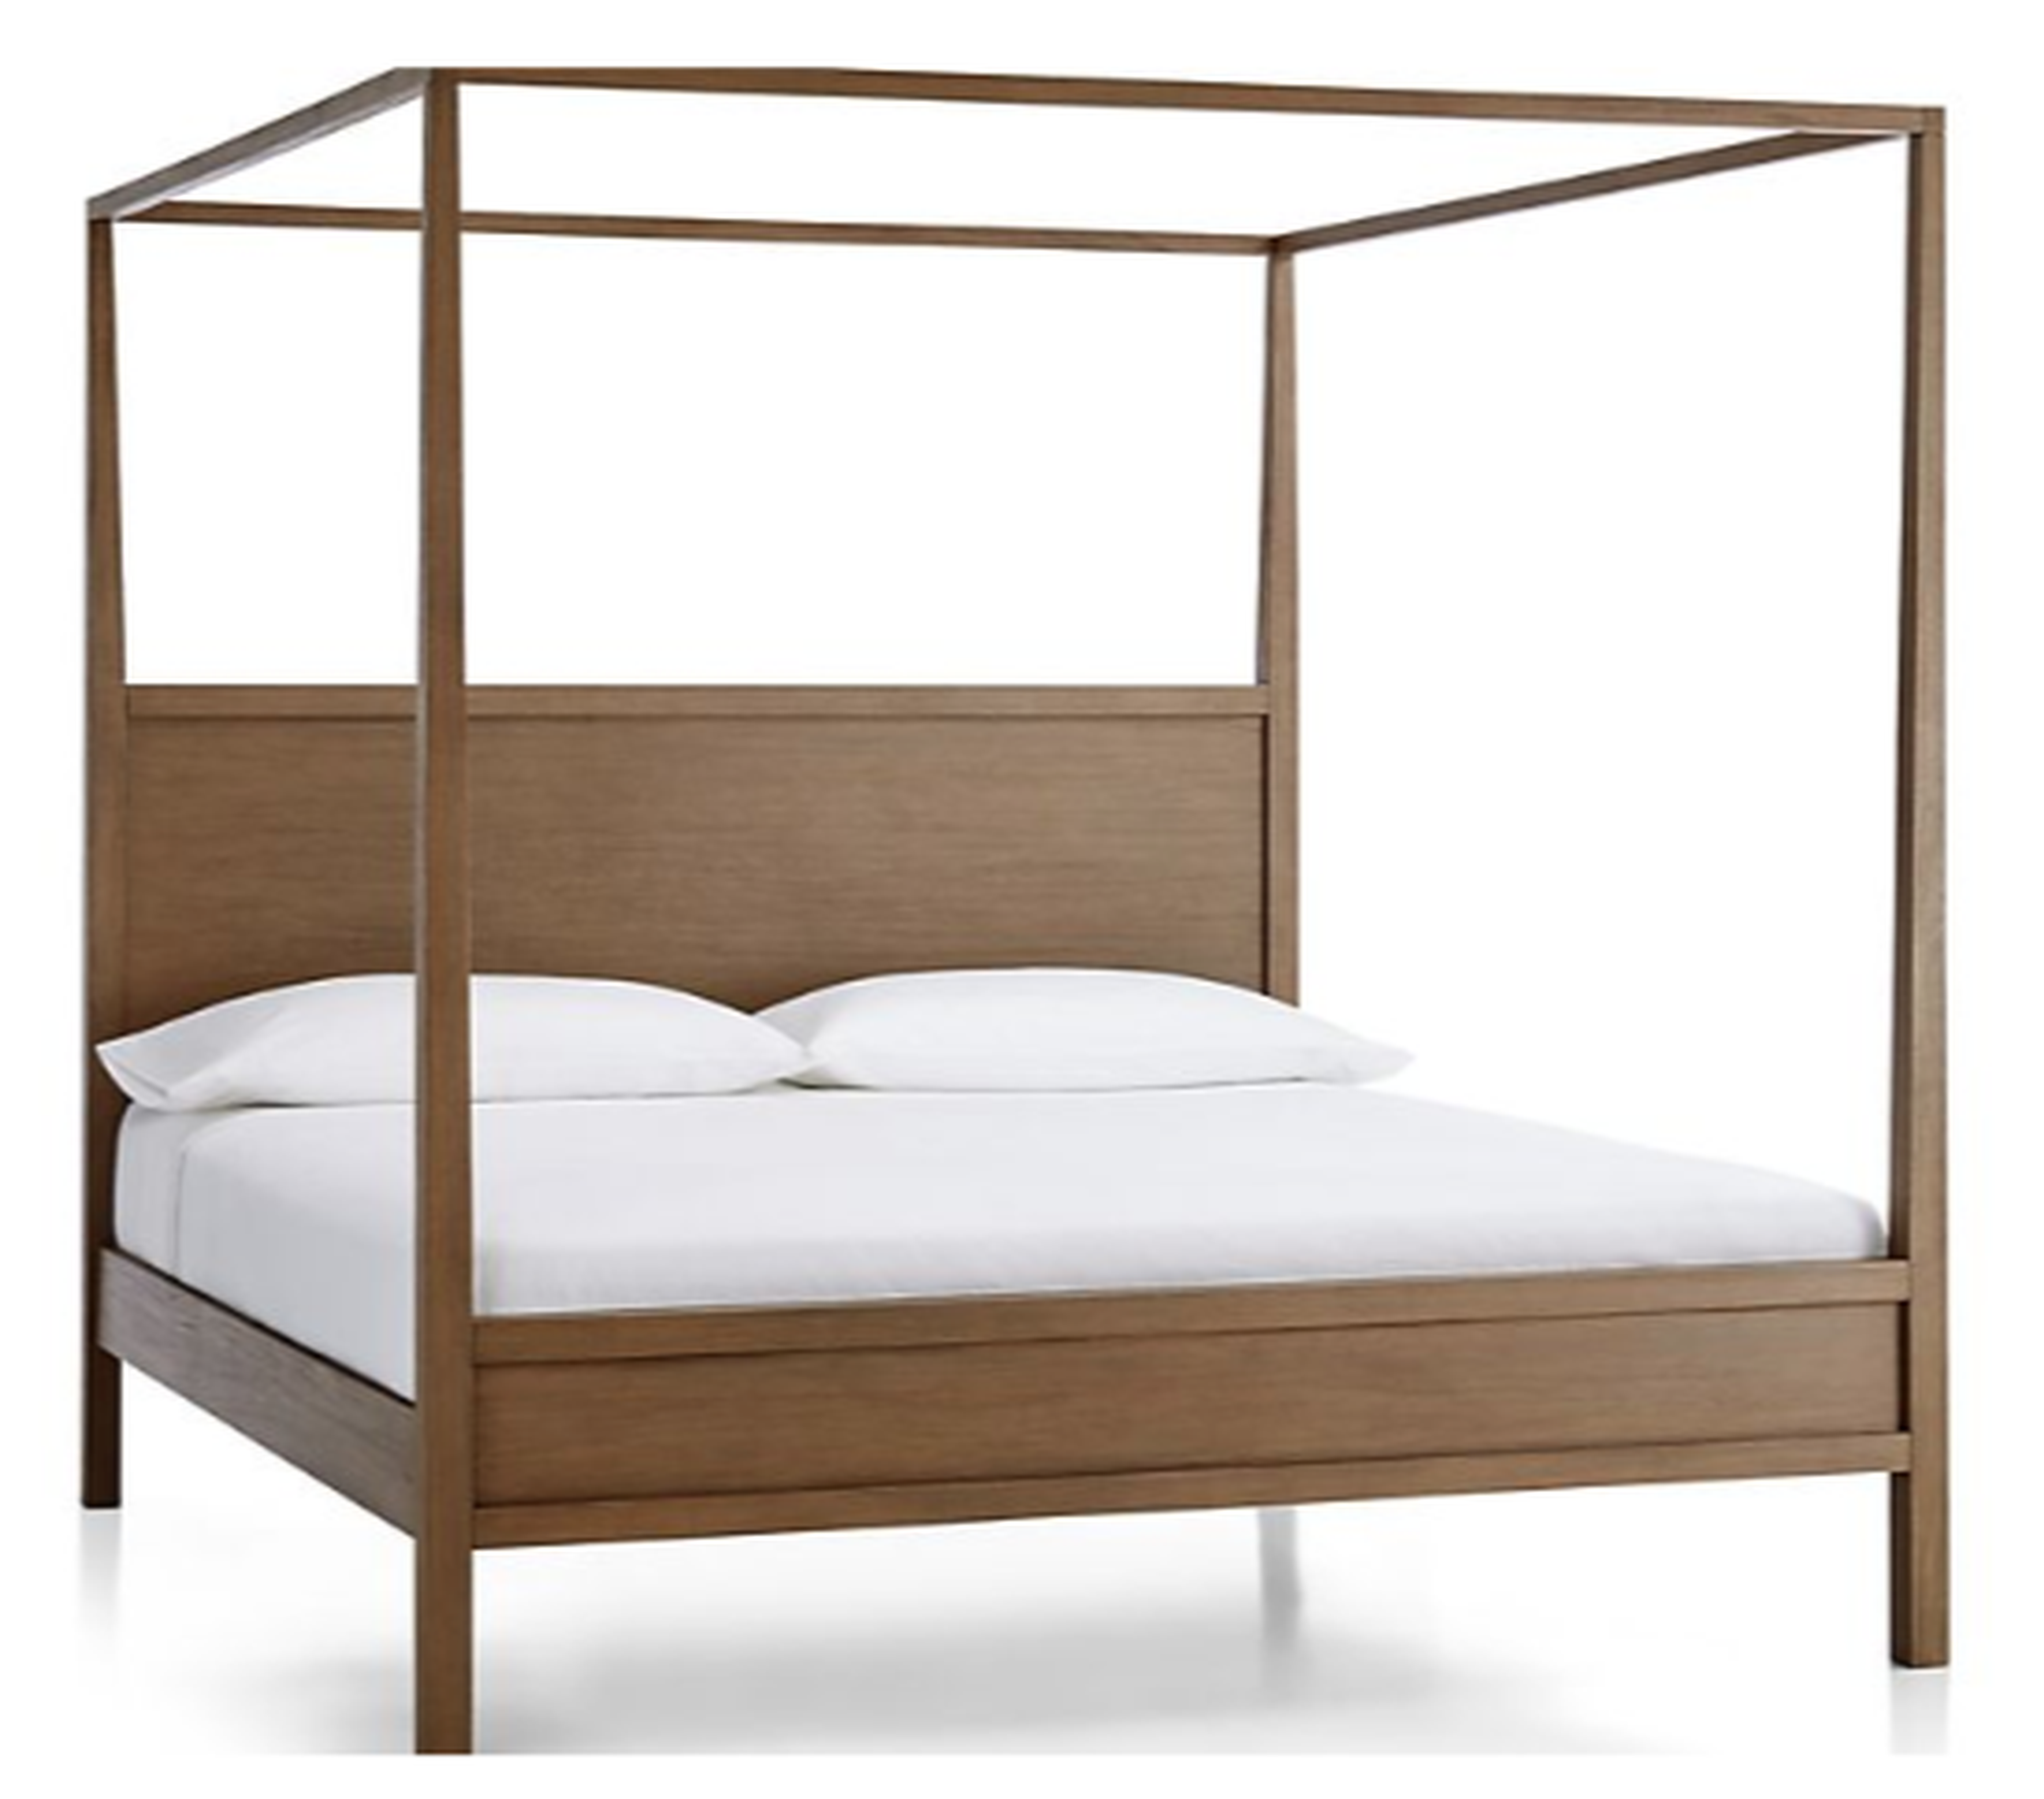 Keane Driftwood King Canopy Bed - Crate and Barrel